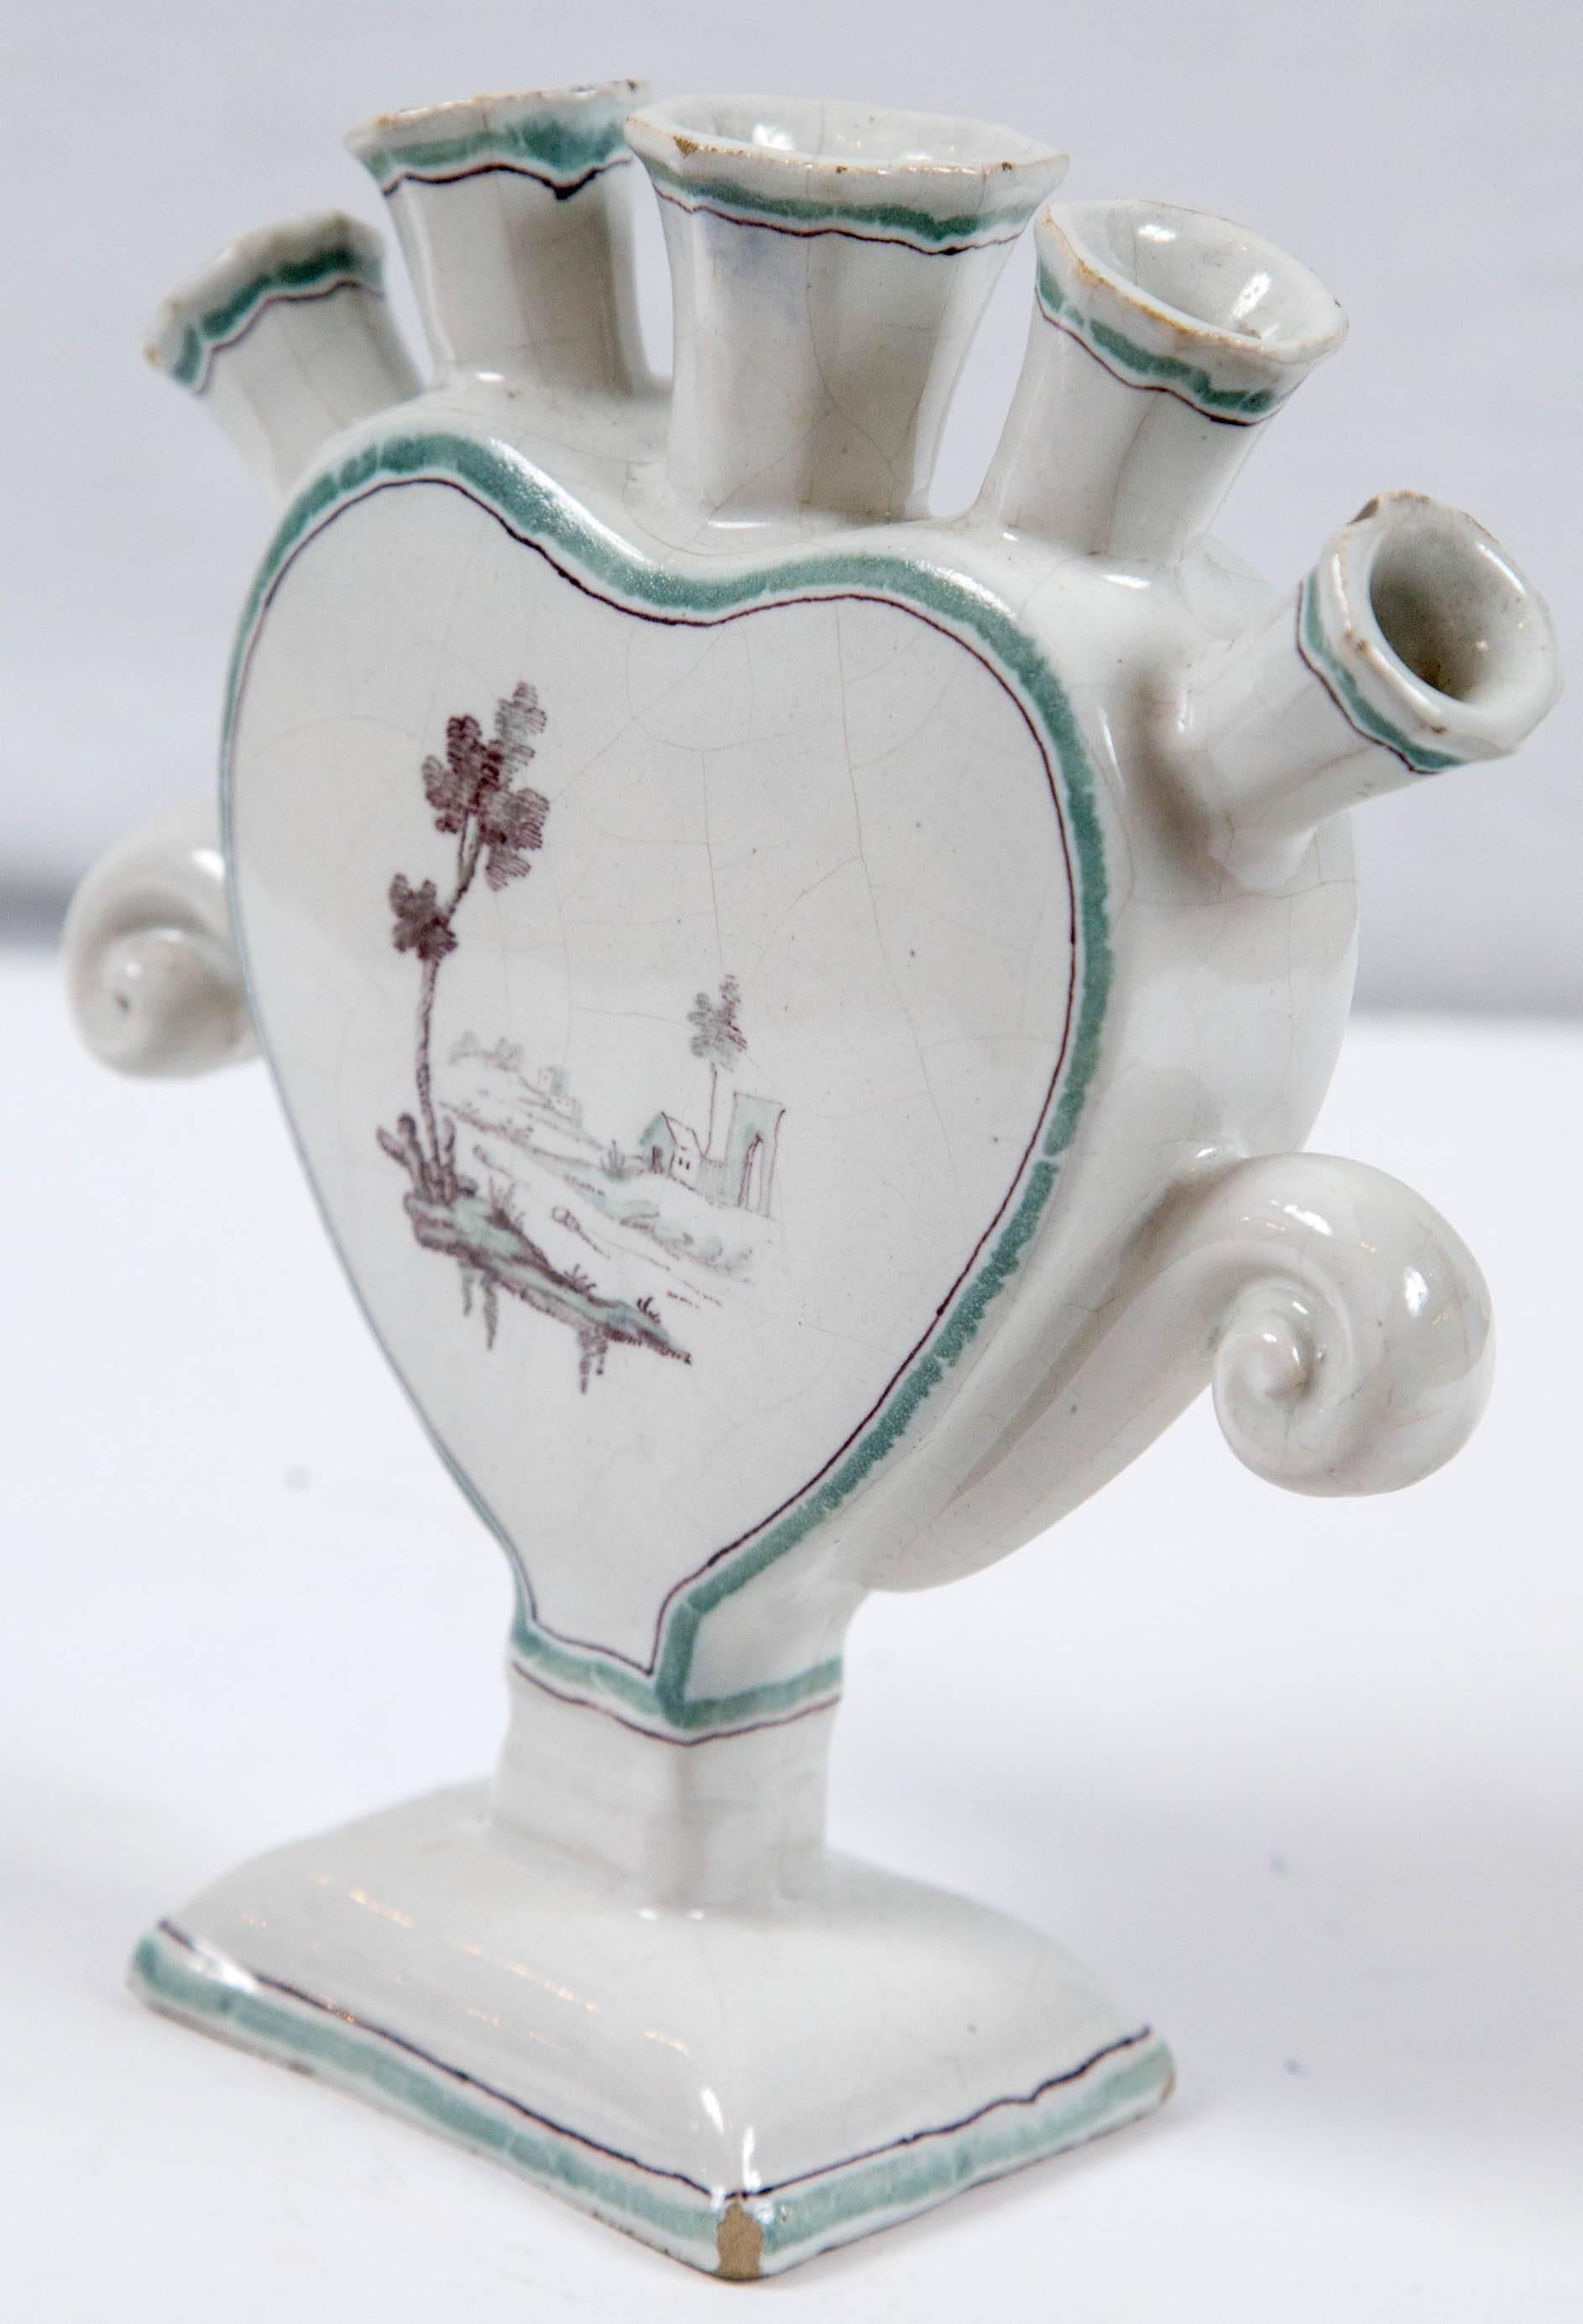 Ceramic French Faience Tulipiere, Early 19th Century